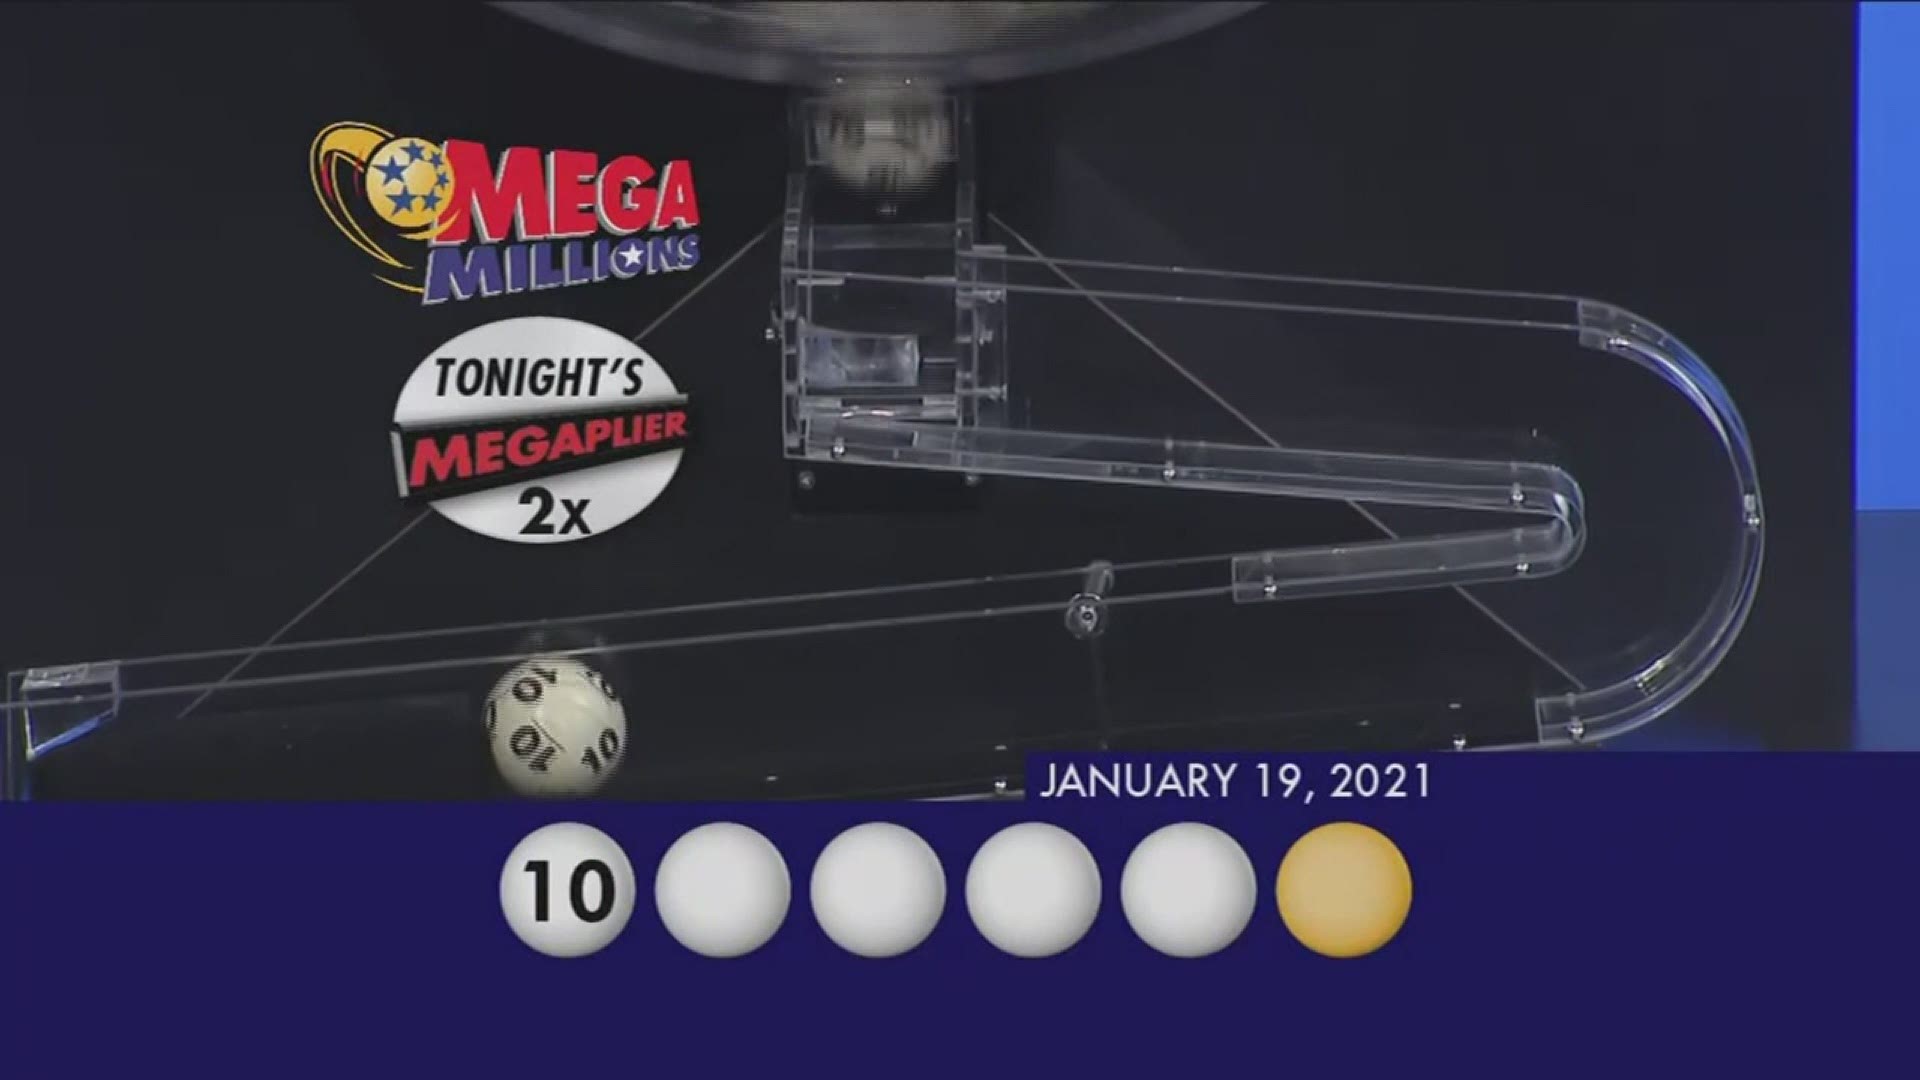 The ticket matched all five white balls drawn, 10-19-26-28-50, but not the yellow Mega Ball 16, to win $1 million, less applicable withholding.